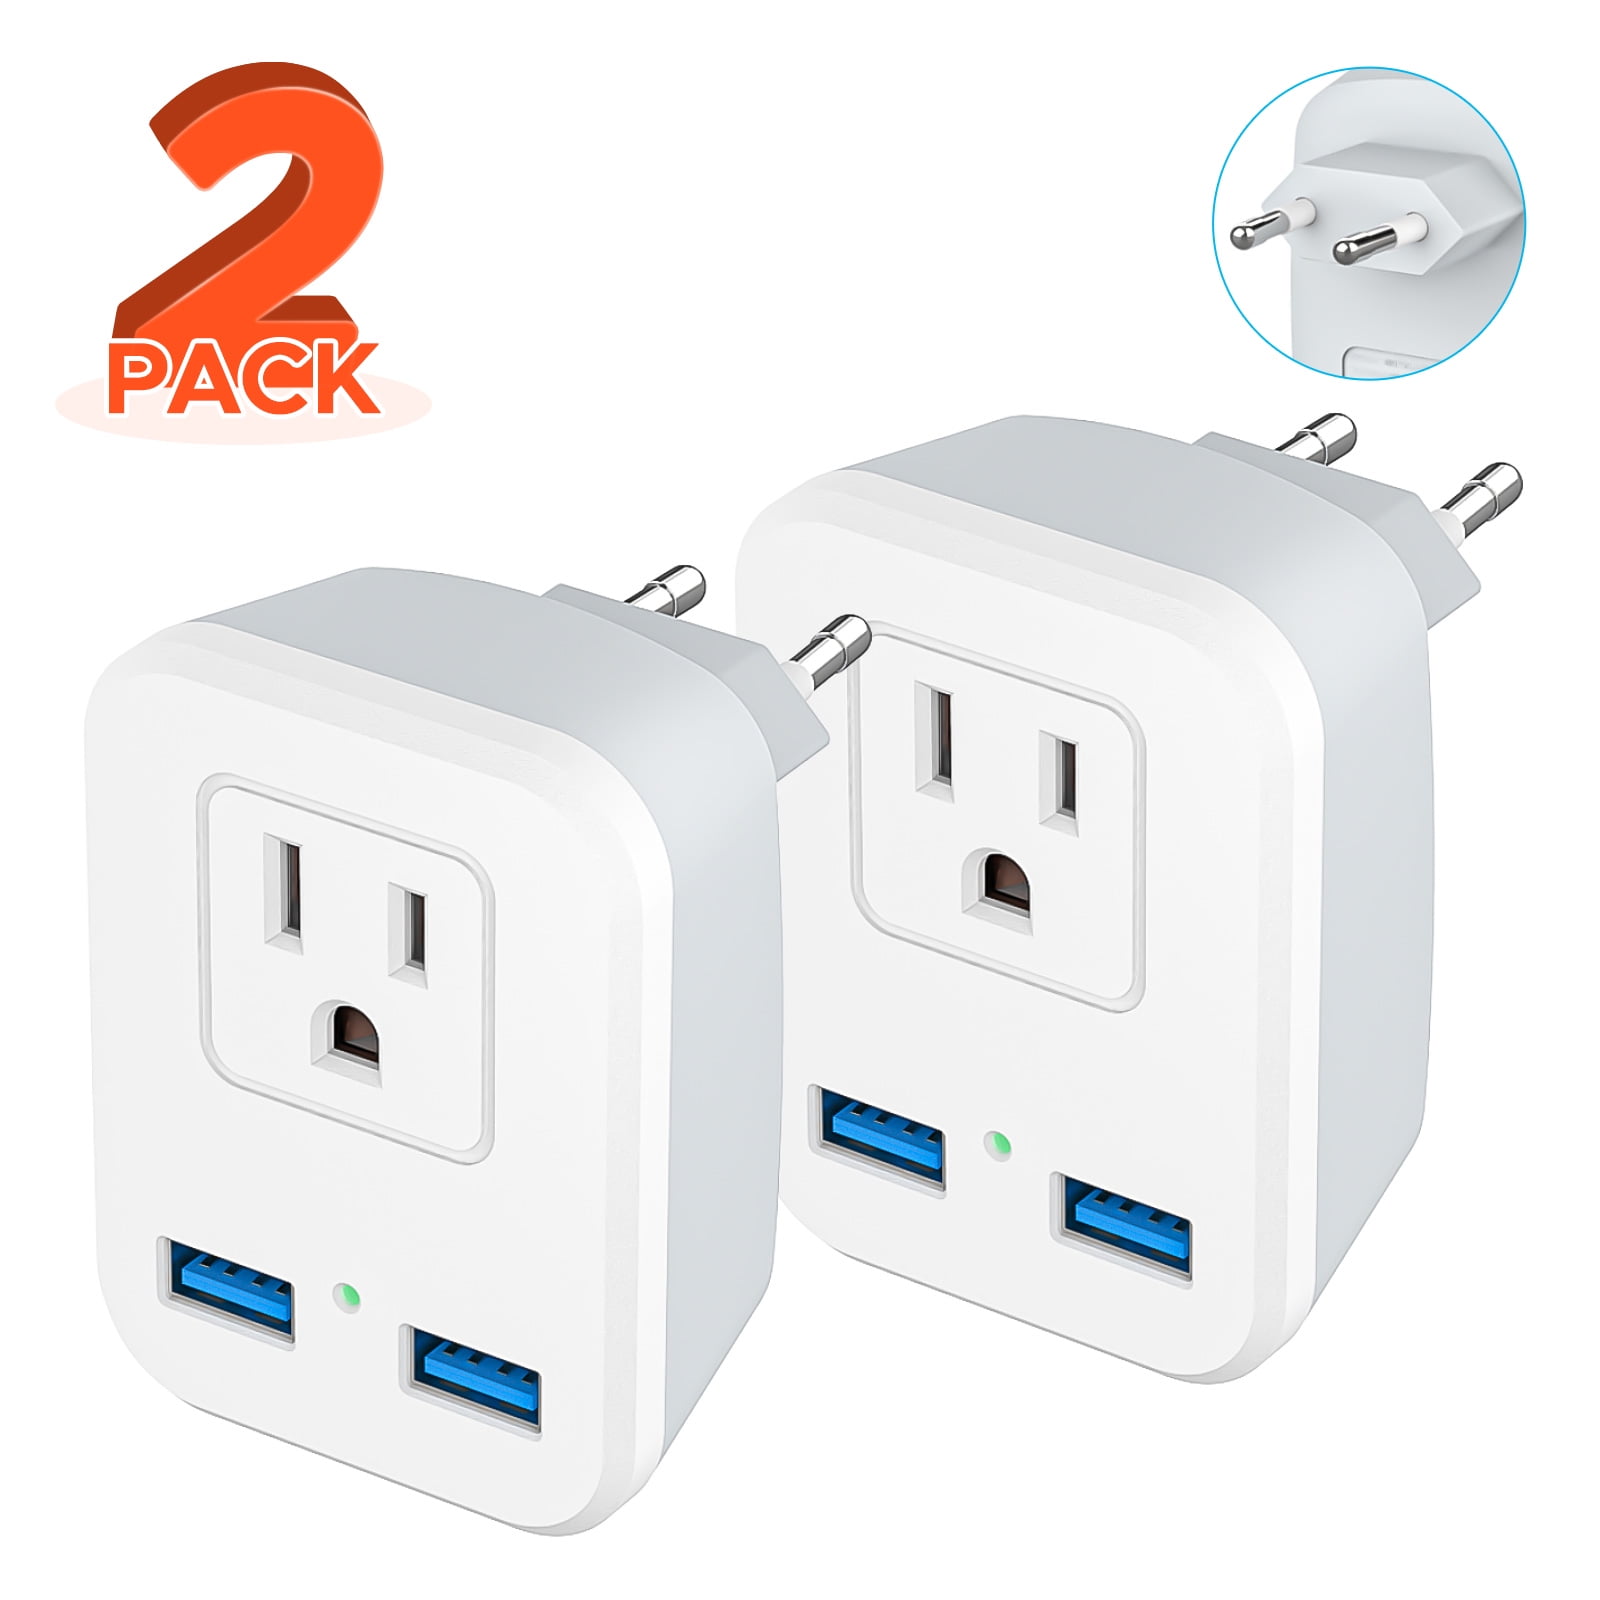 European International Travel Adapter EU Power Plug Wall Charger with AC Outlet Dual USB, US to Most of Europe France Germany Iceland Italy Spain (Type C - Walmart.com